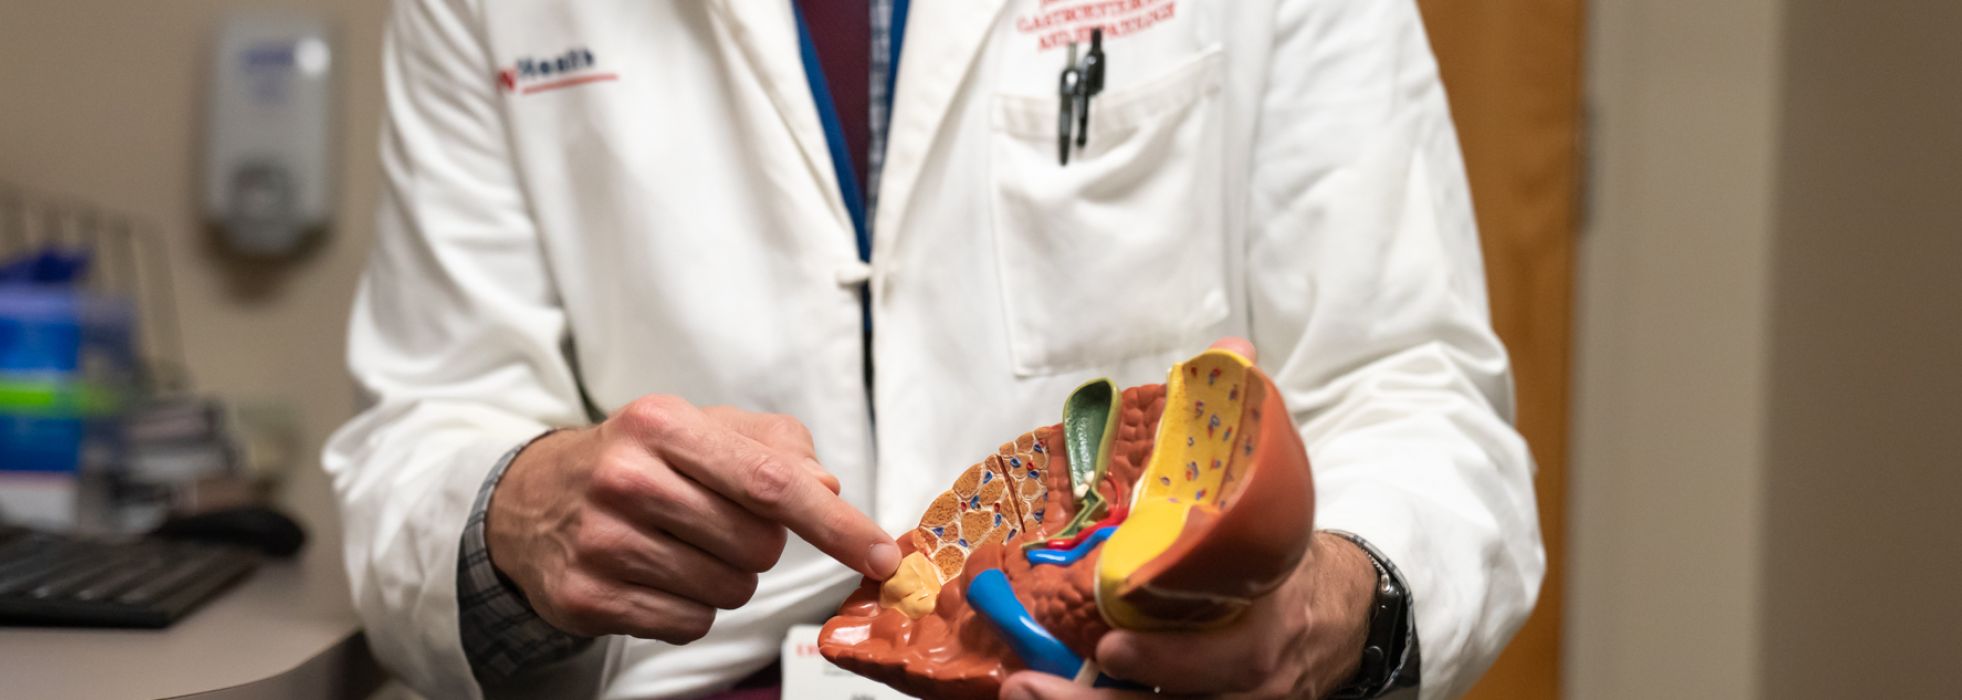 GI physician showing model of liver